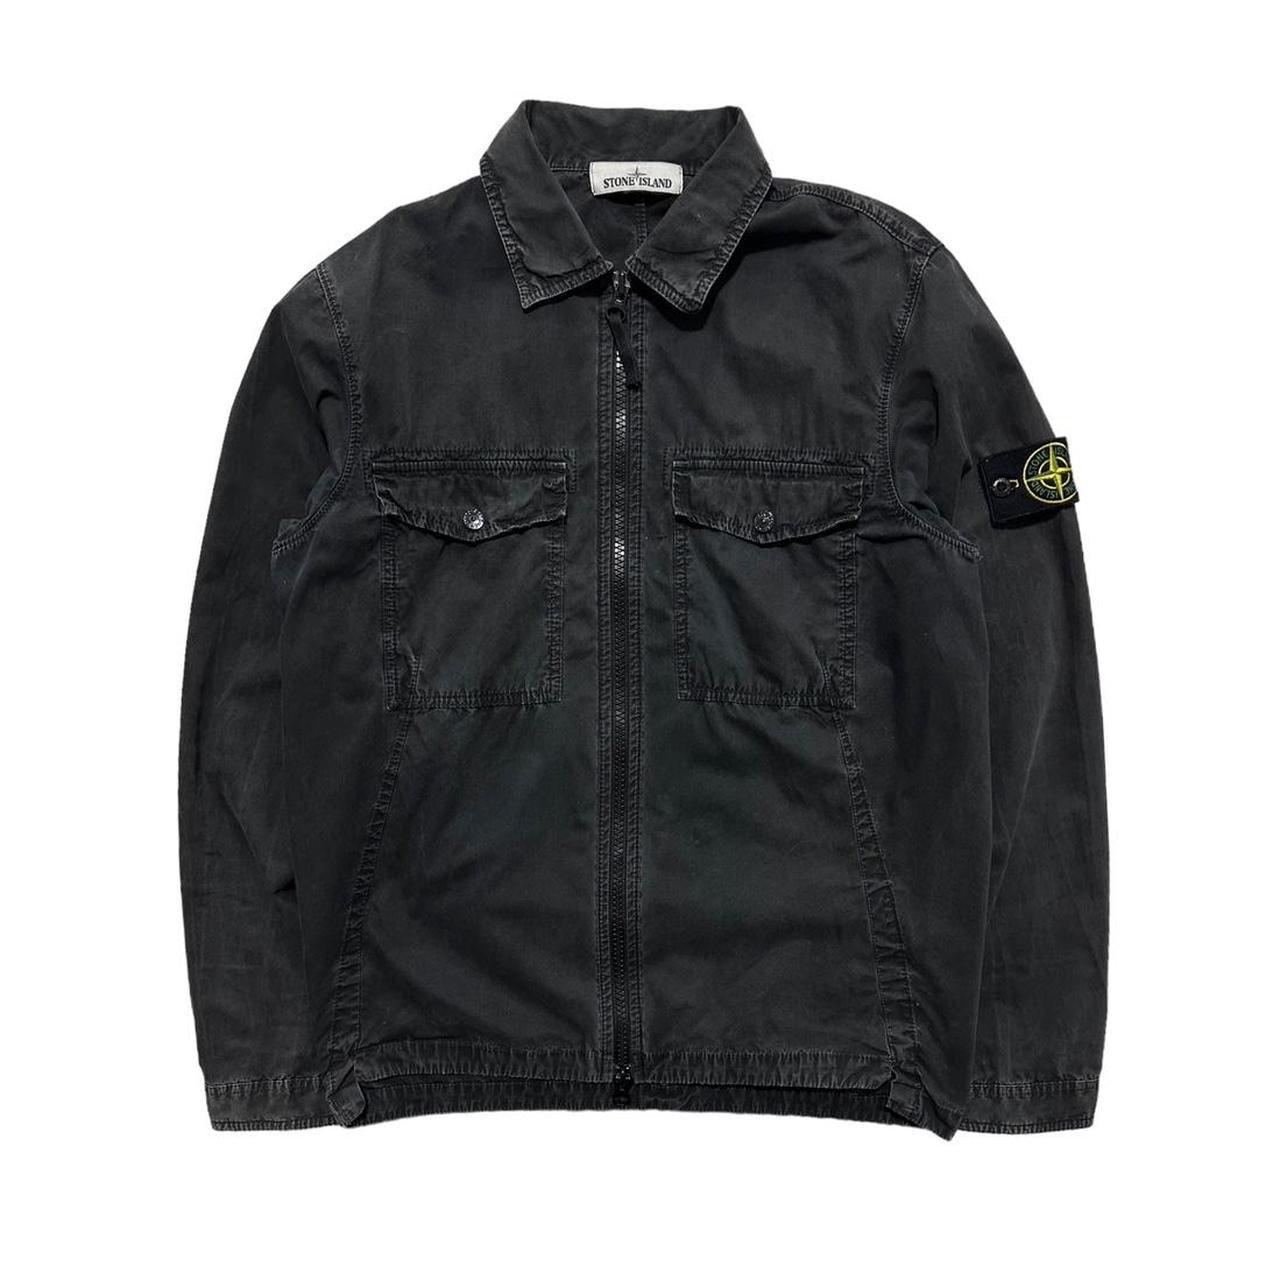 Stone Island canvas double pocket overshirt - Known Source